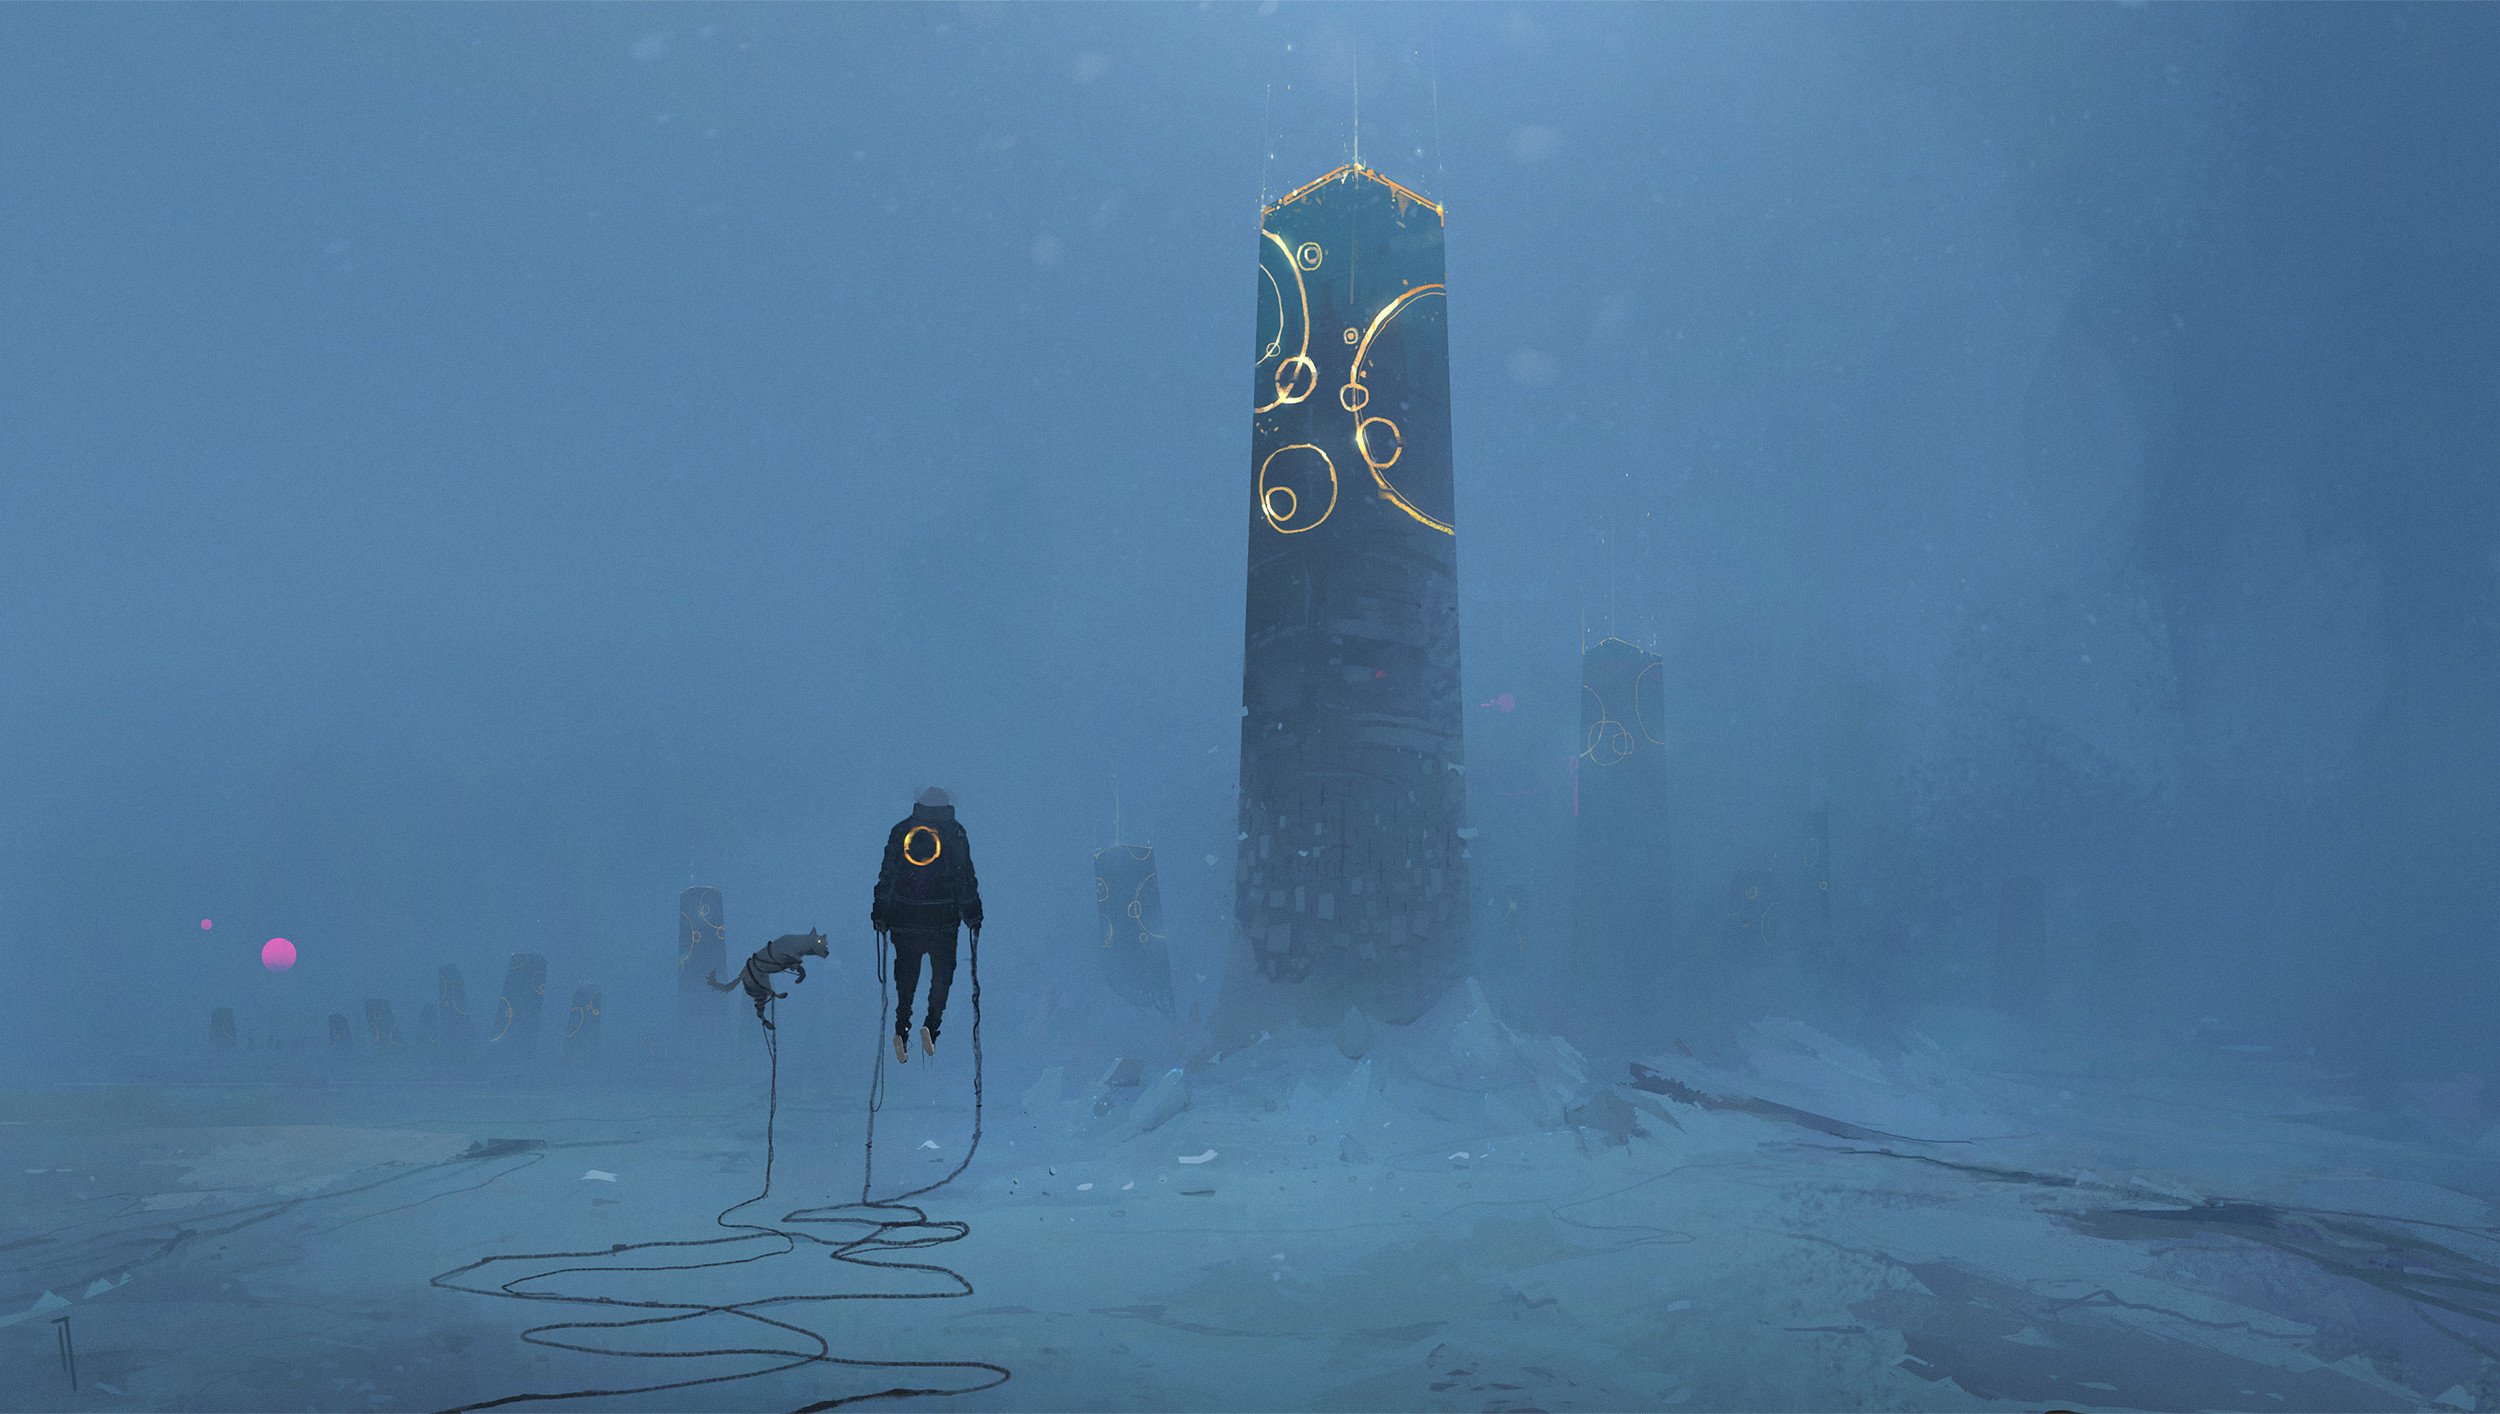 Cyberpunk Science Fiction Environment Dog Snow Gravity Digital Art Cable Monolith Ismail Inceoglu Wallpaper:2500x1414